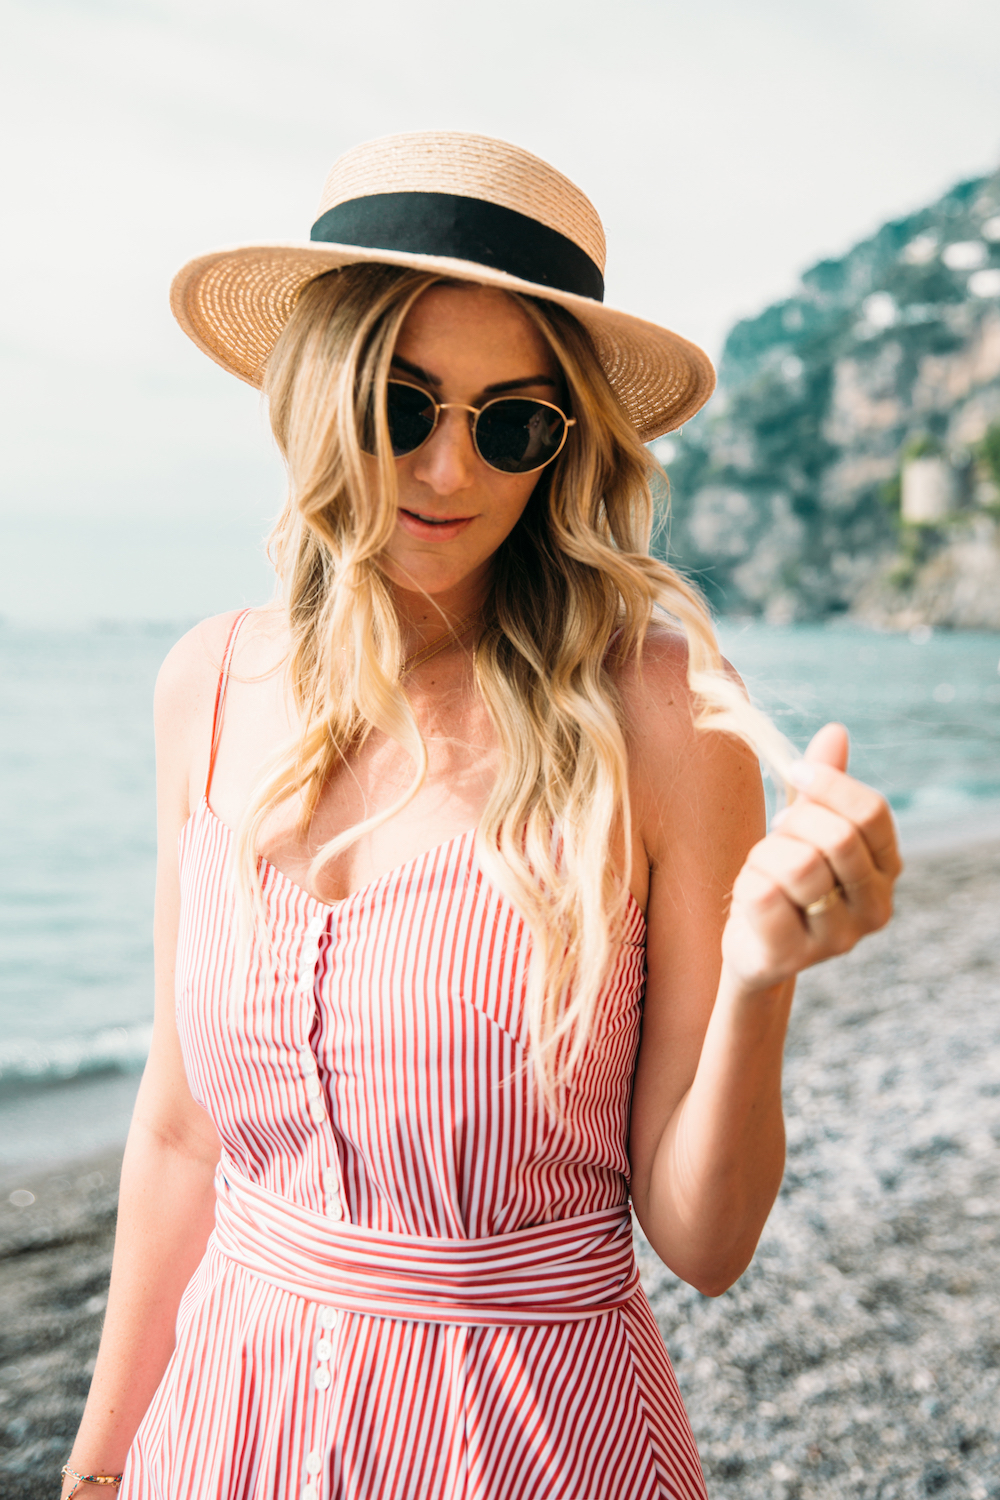 Caitlin Lindquist of Dash of Darling shares her travel diary from Positano, Italy with Royal Caribbean Cruises while wearing a stripe Elle Sasson dress.